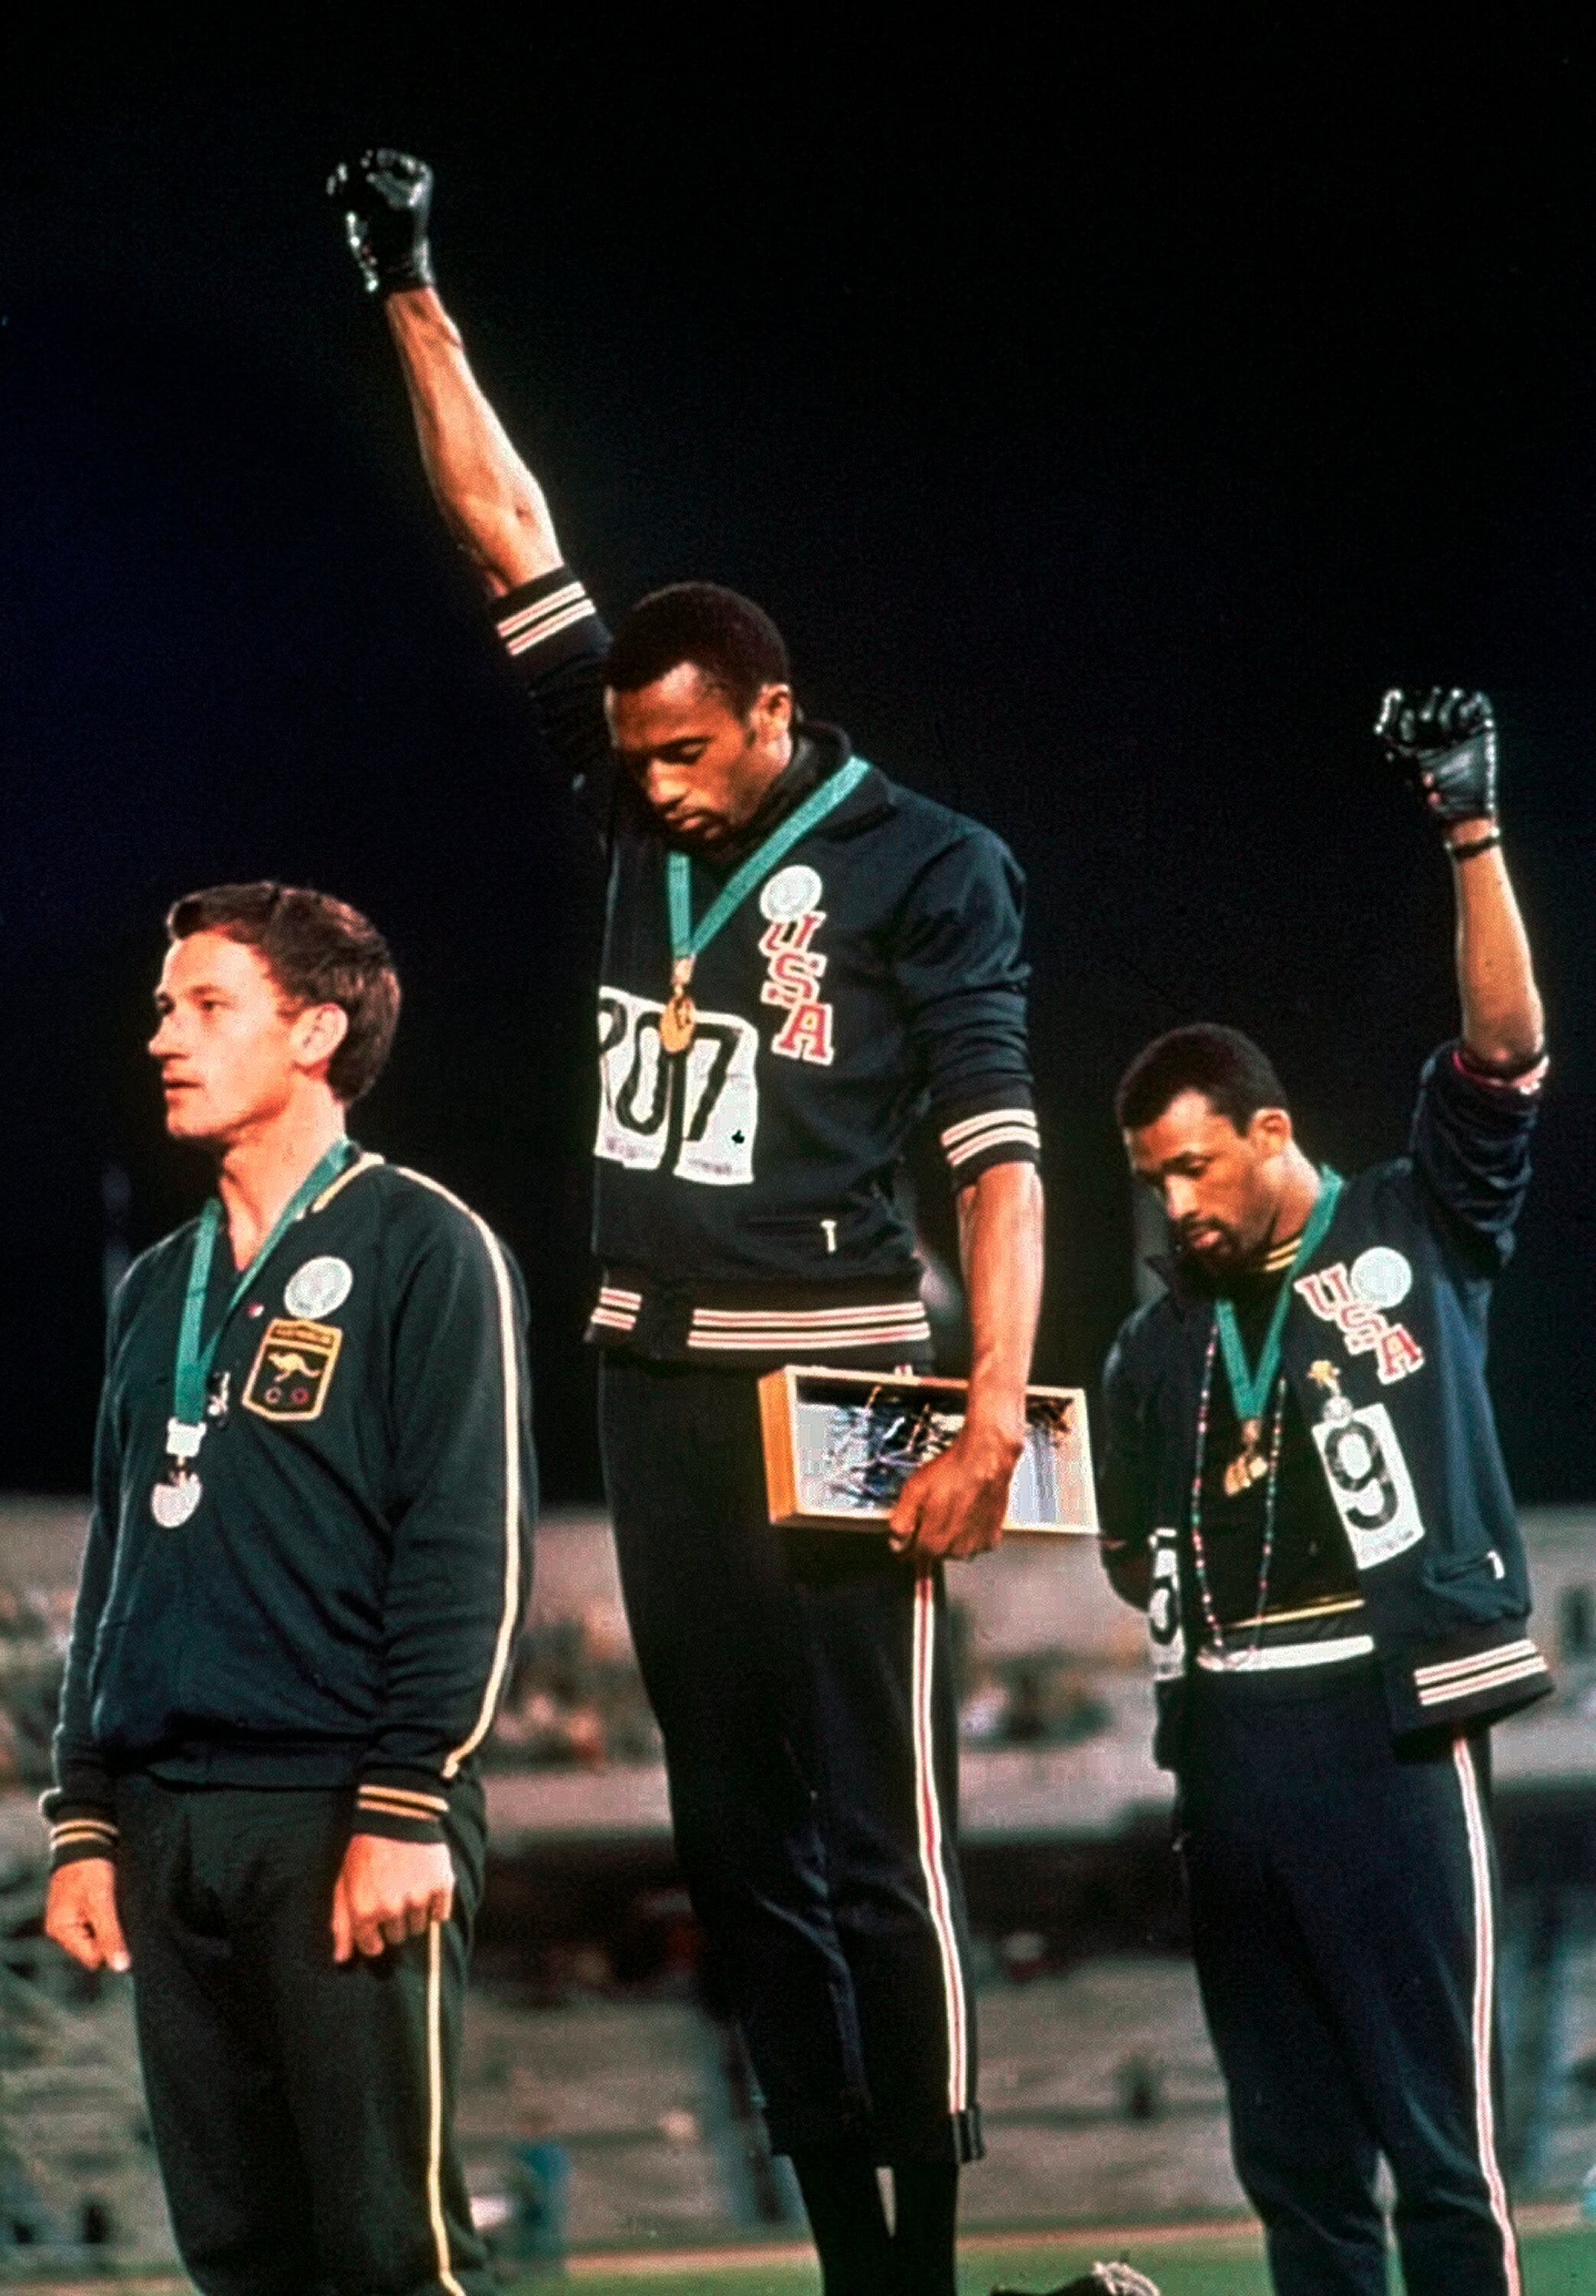 The most significant gesture of protest of the Olympic Games occurred in Mexico in 1968 when two American athletes raised their fists to protest against racism in their country.  (AP Photo / File)